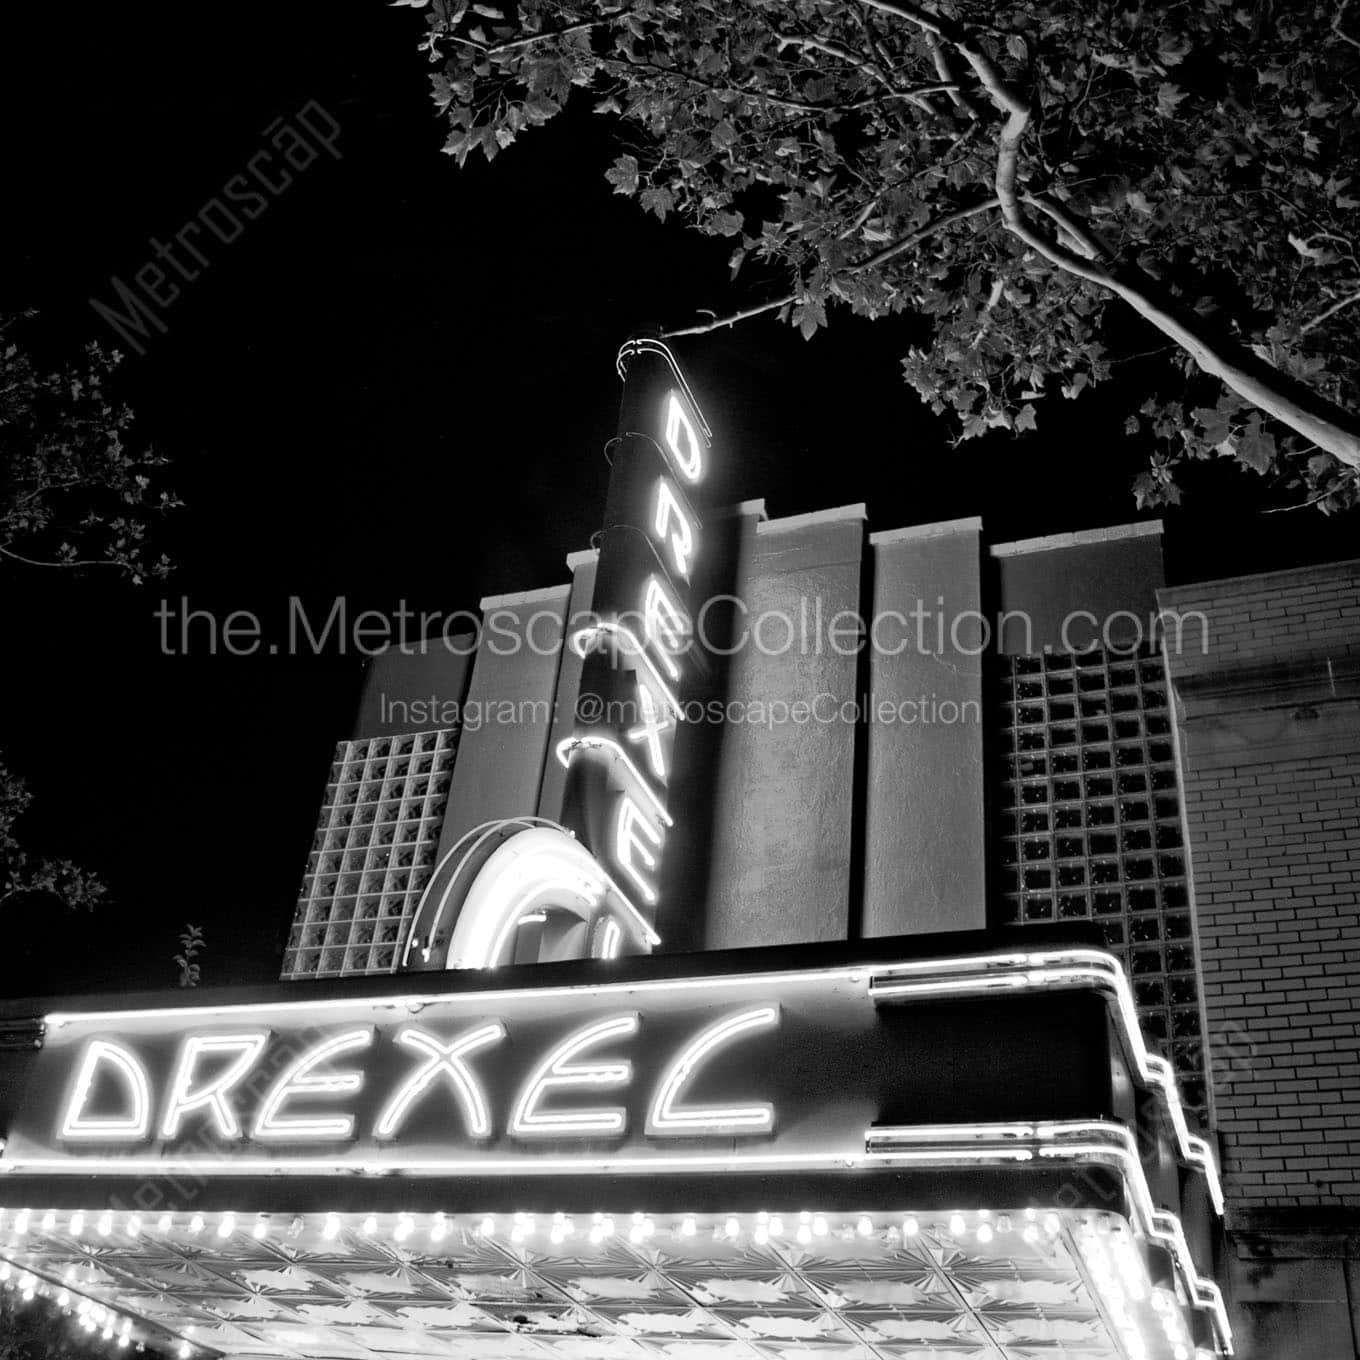 bexley drexel theater at night Black & White Wall Art